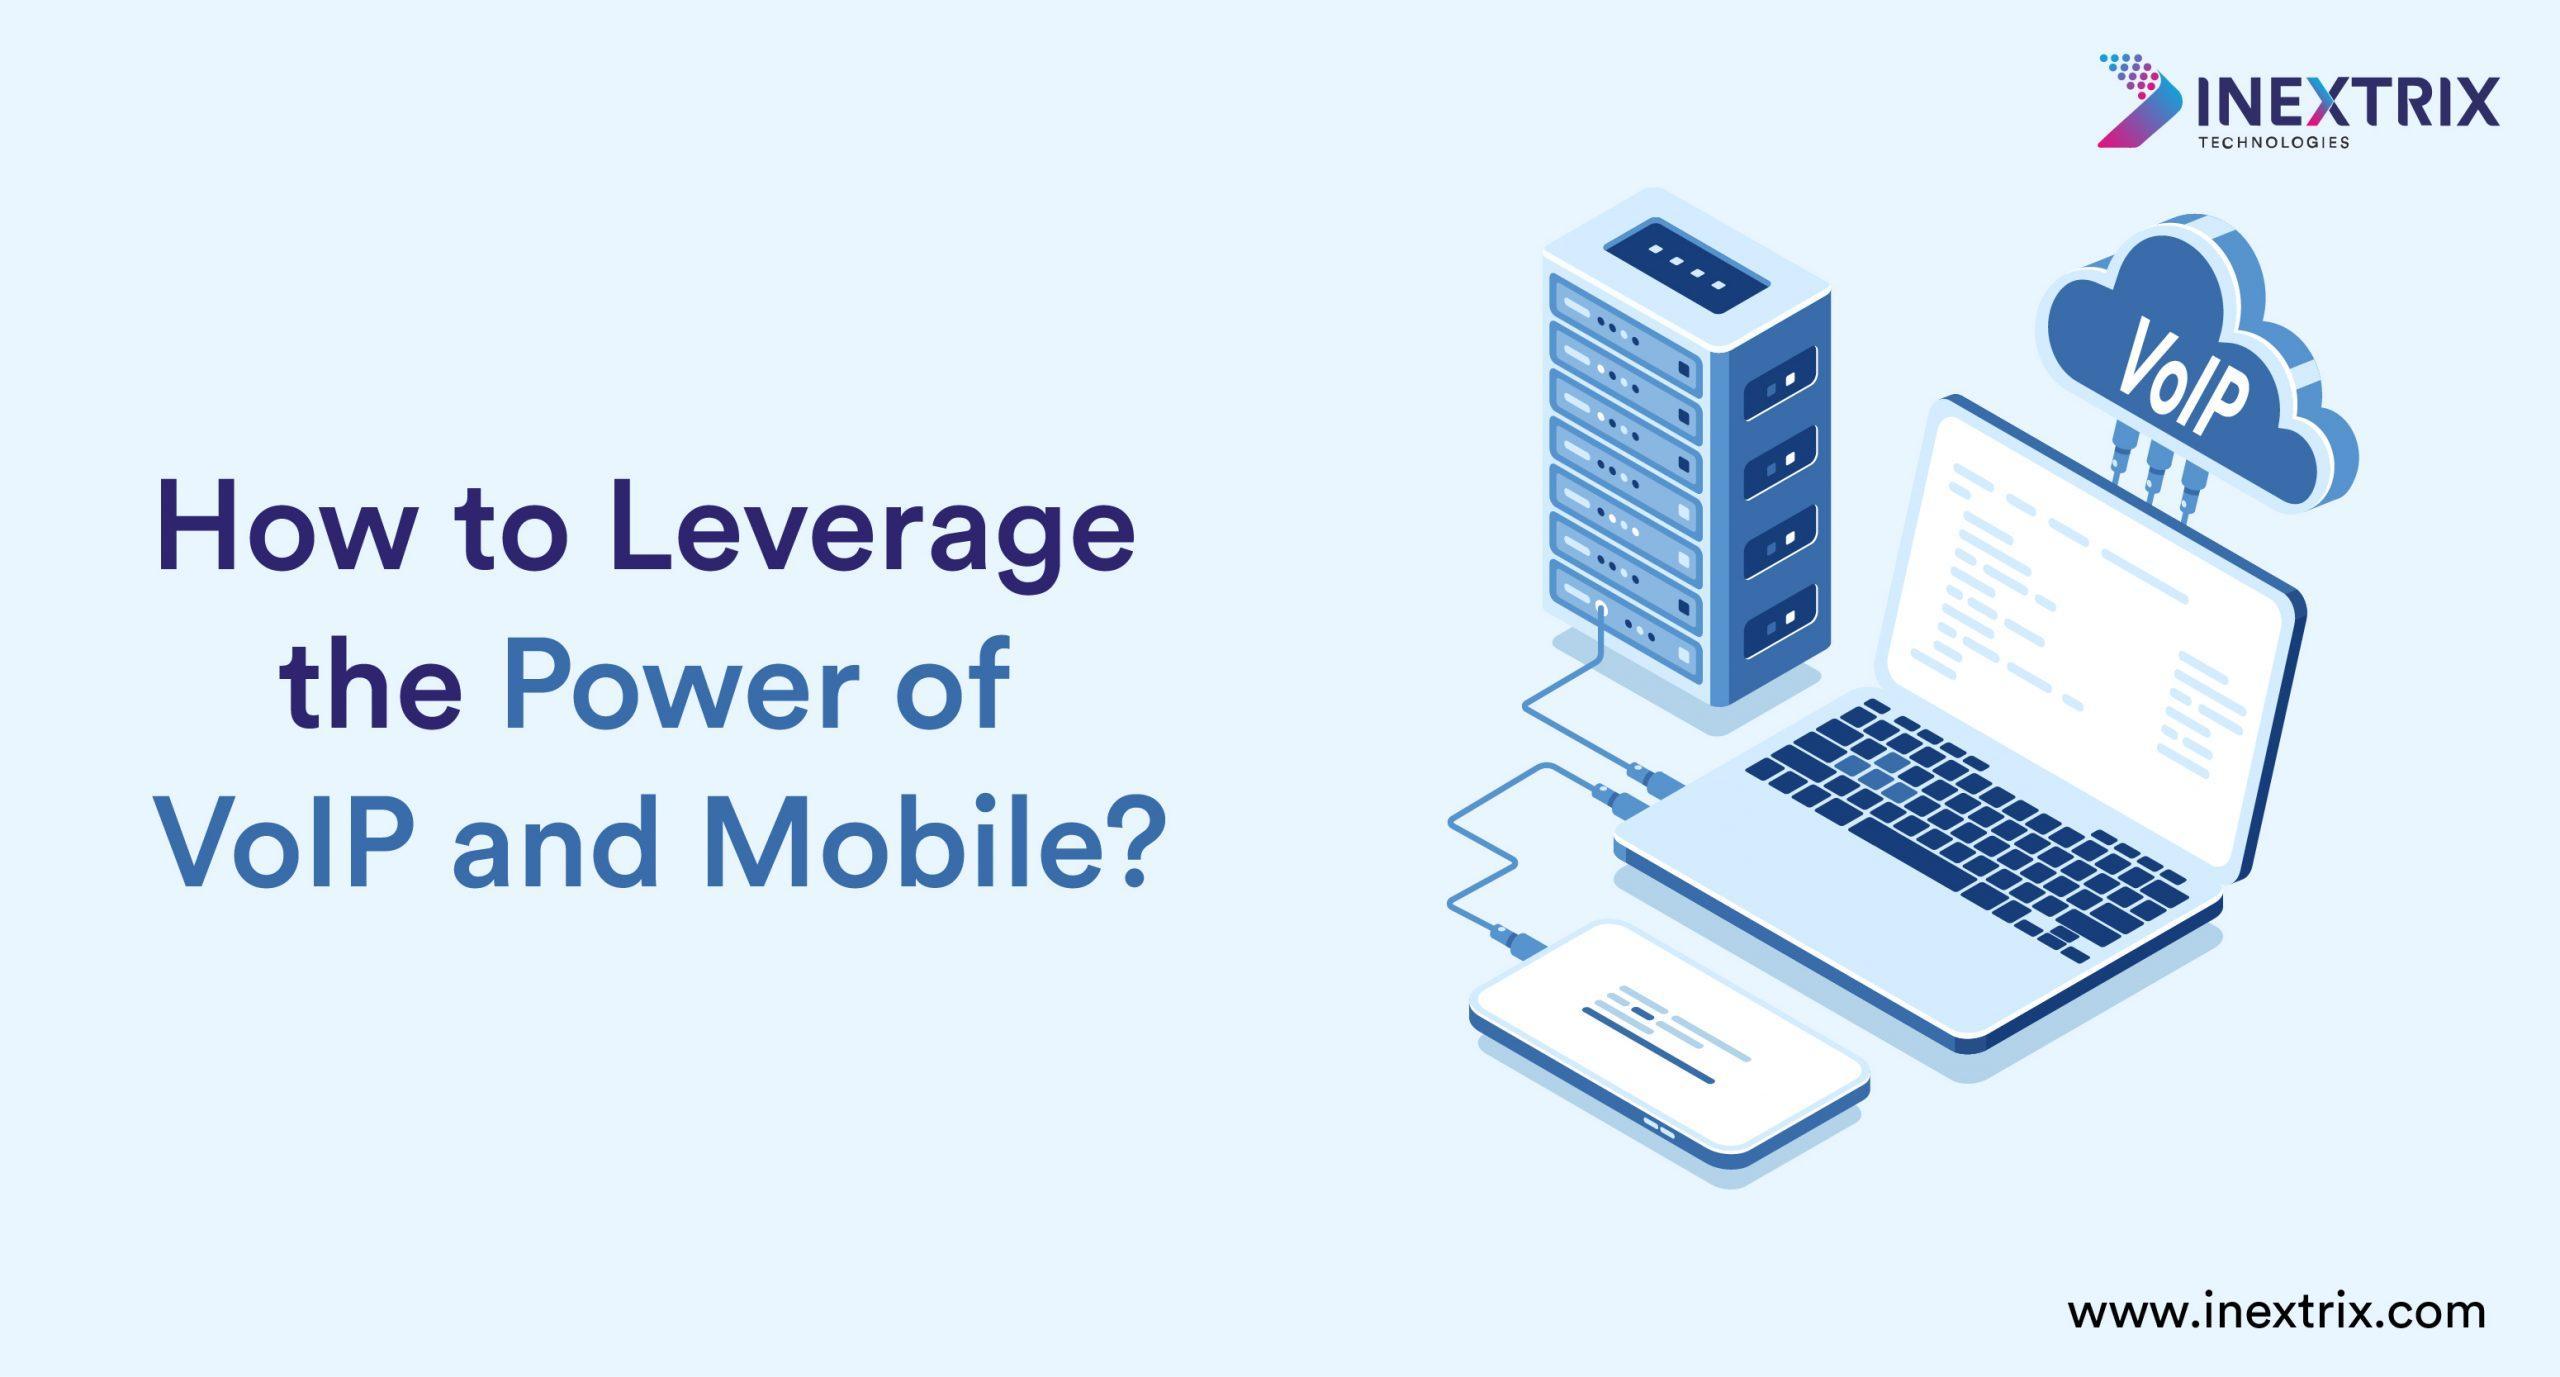 How to Leverage the Power of VoIP and Mobile